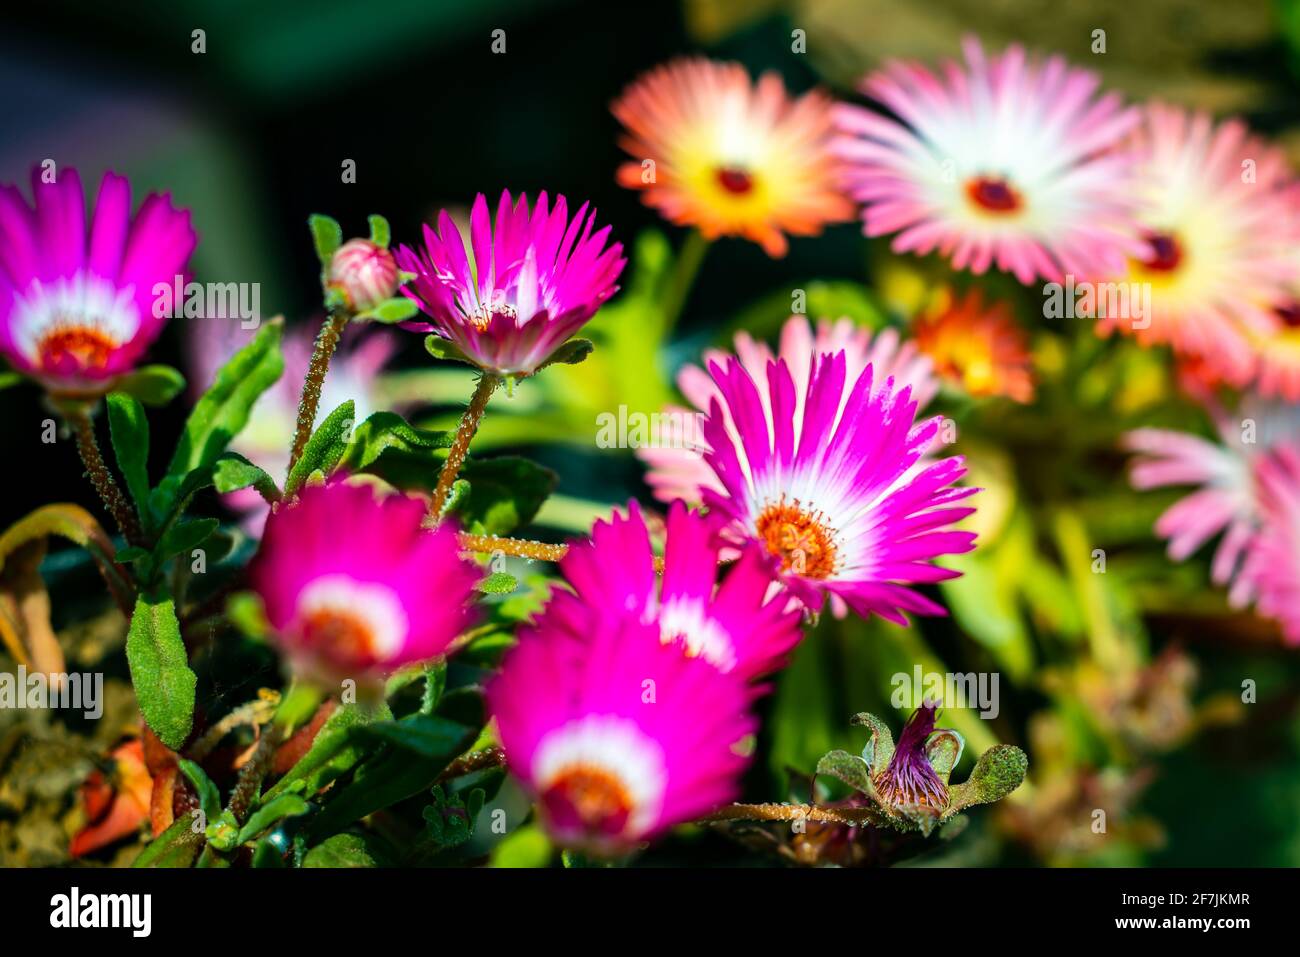 Flowers in the garden. Mesembryanthemum is a genus of flowering plants in the family of Aizoaceae. Stock Photo